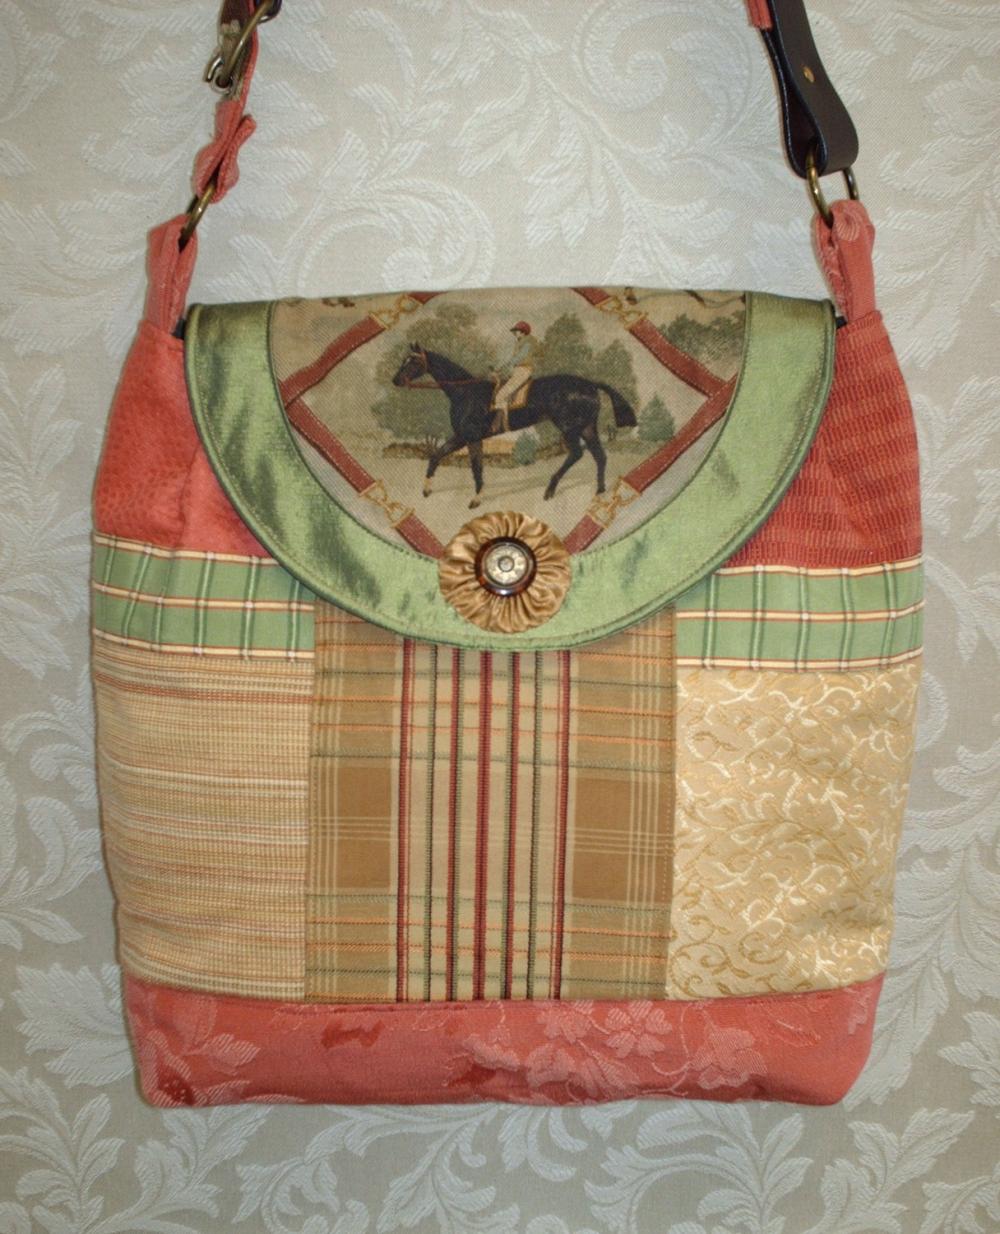 Equestrian Satchel Style Handbag / Coral Gold And Brown With Quilting